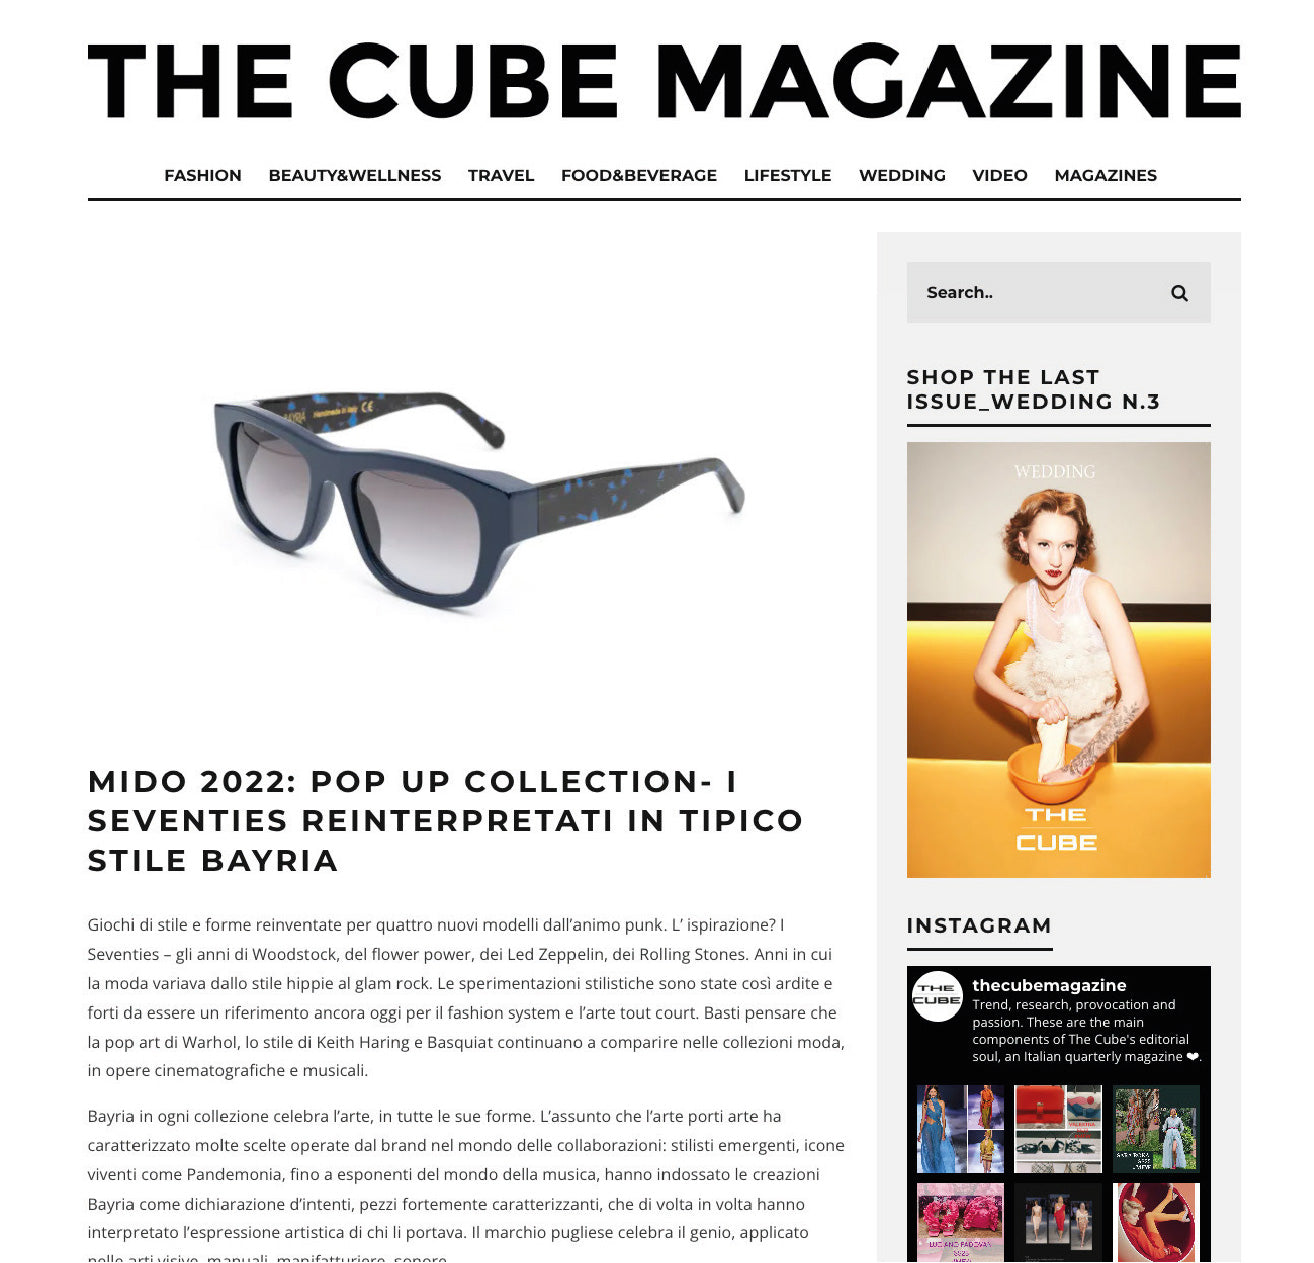 The cube magazine: Mido 2022, the seventies reinterpreted in typical Bayria style